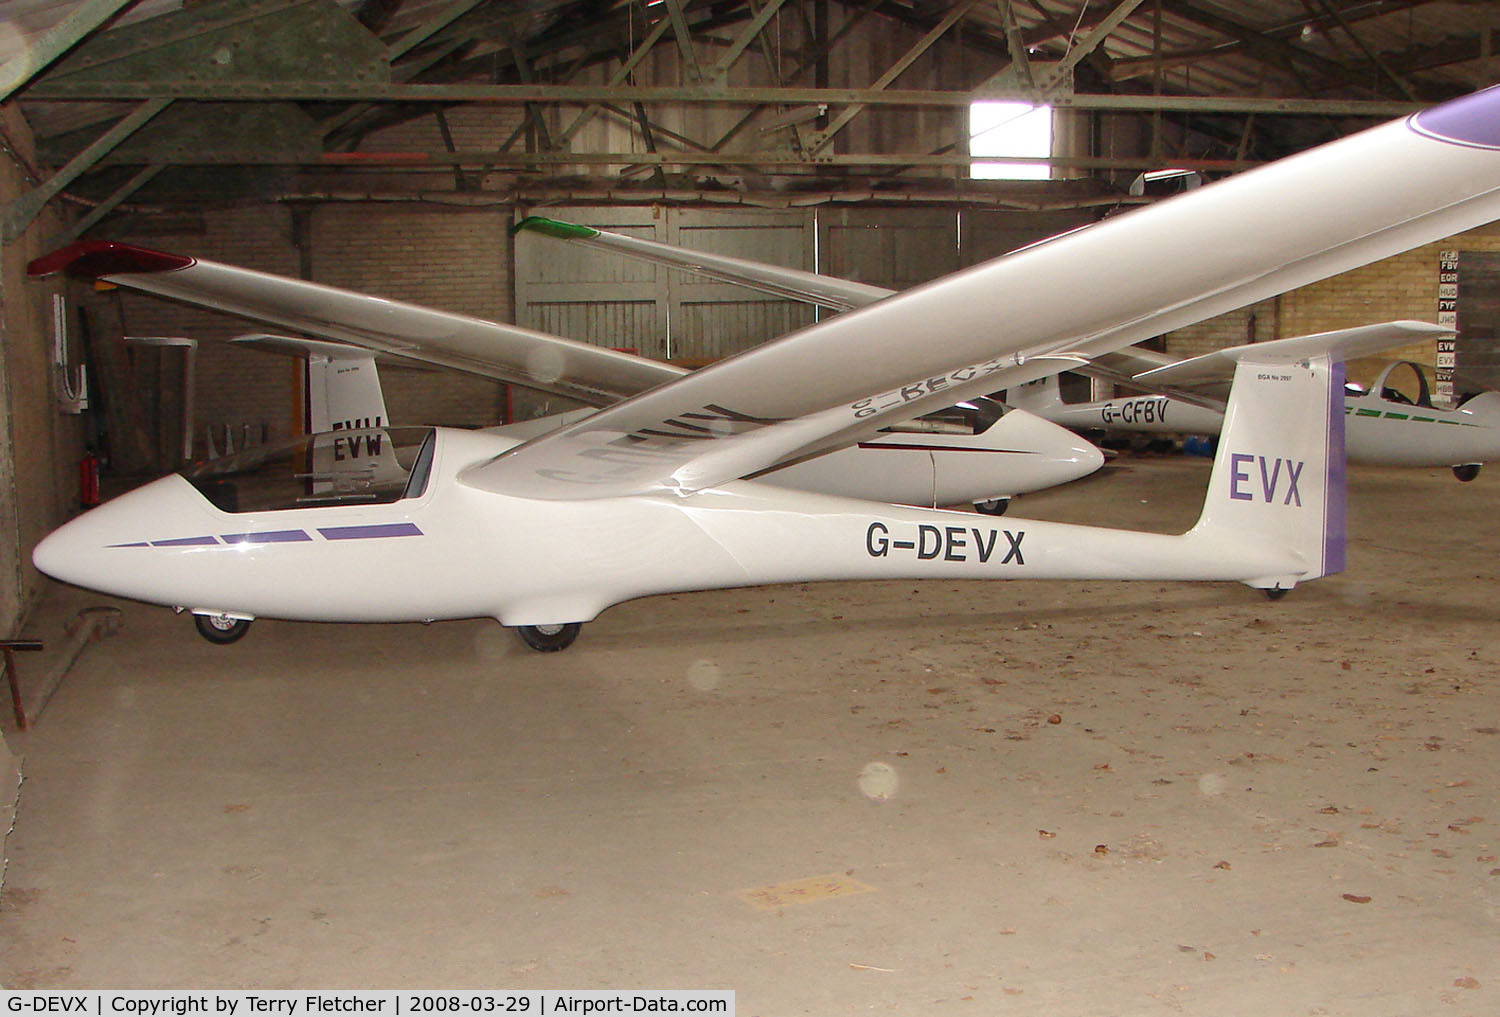 G-DEVX, 1994 Schleicher ASK-23 C/N 23007, Gliders at the London Gliding Club at Dunstable Downs